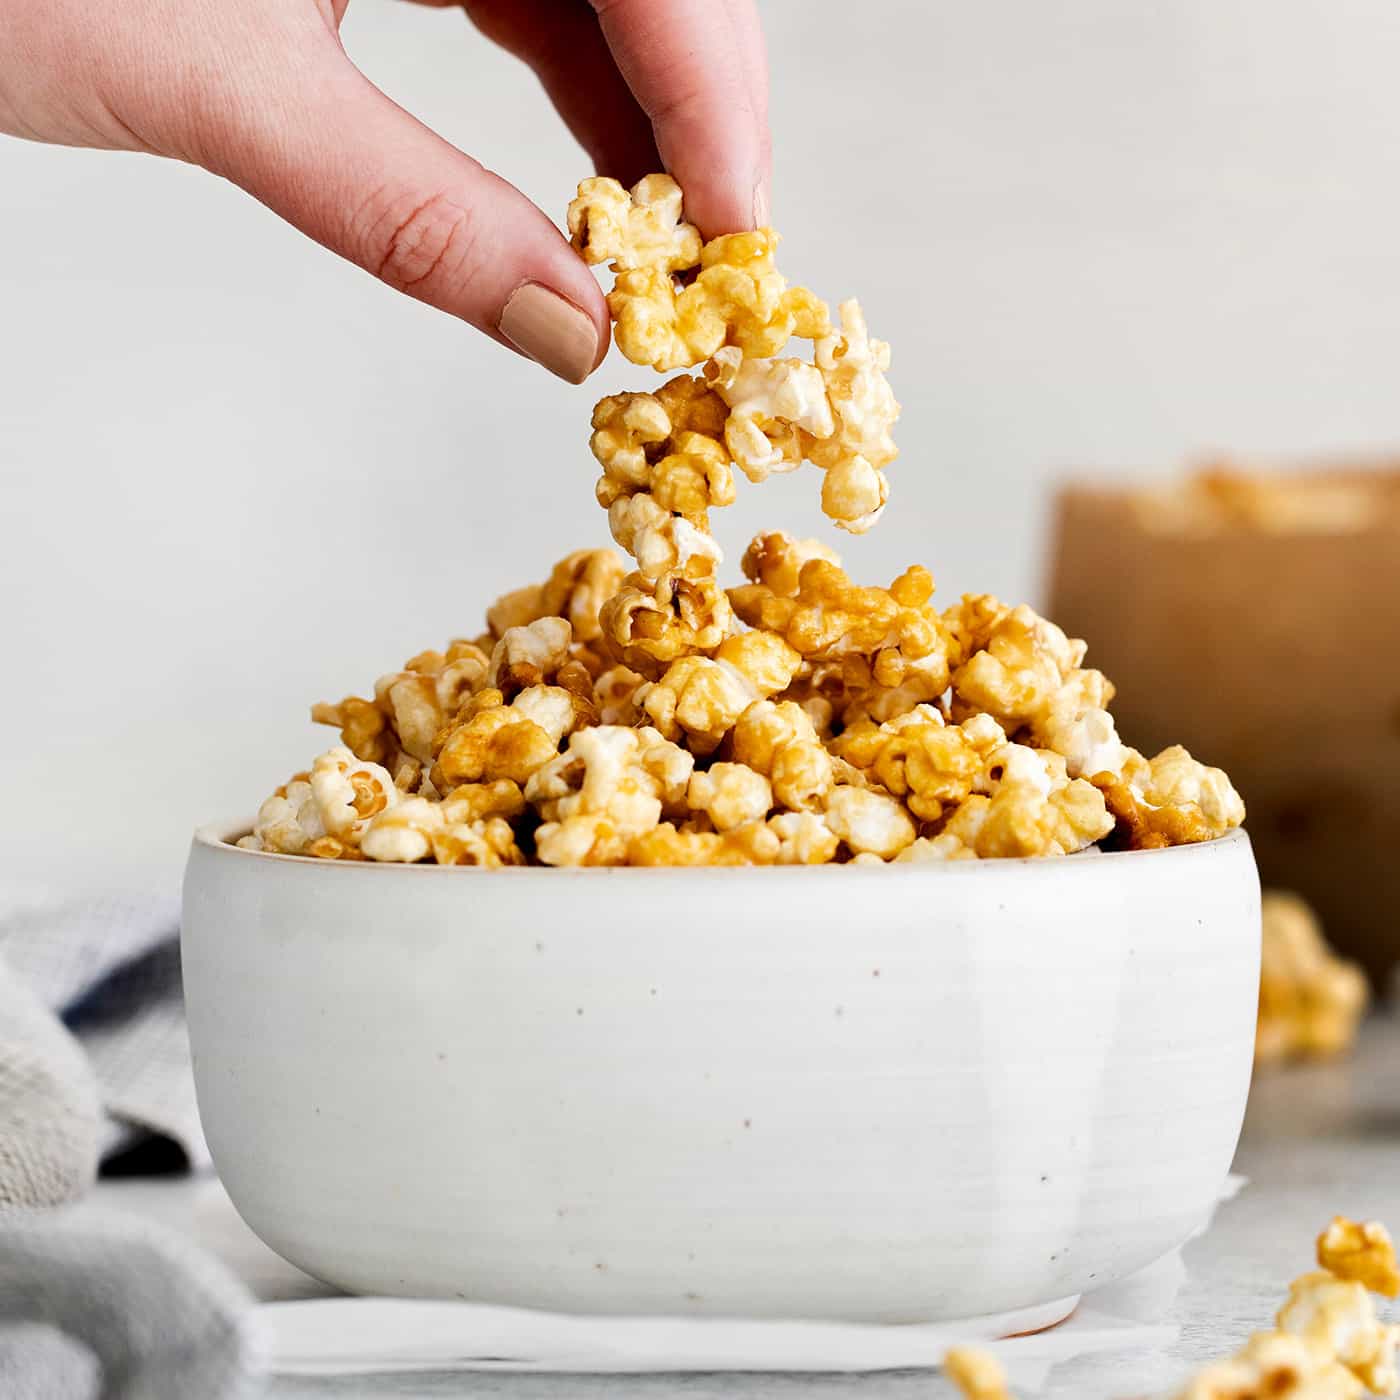 A hand crabbing a piece of caramel popcorn from a white bowl